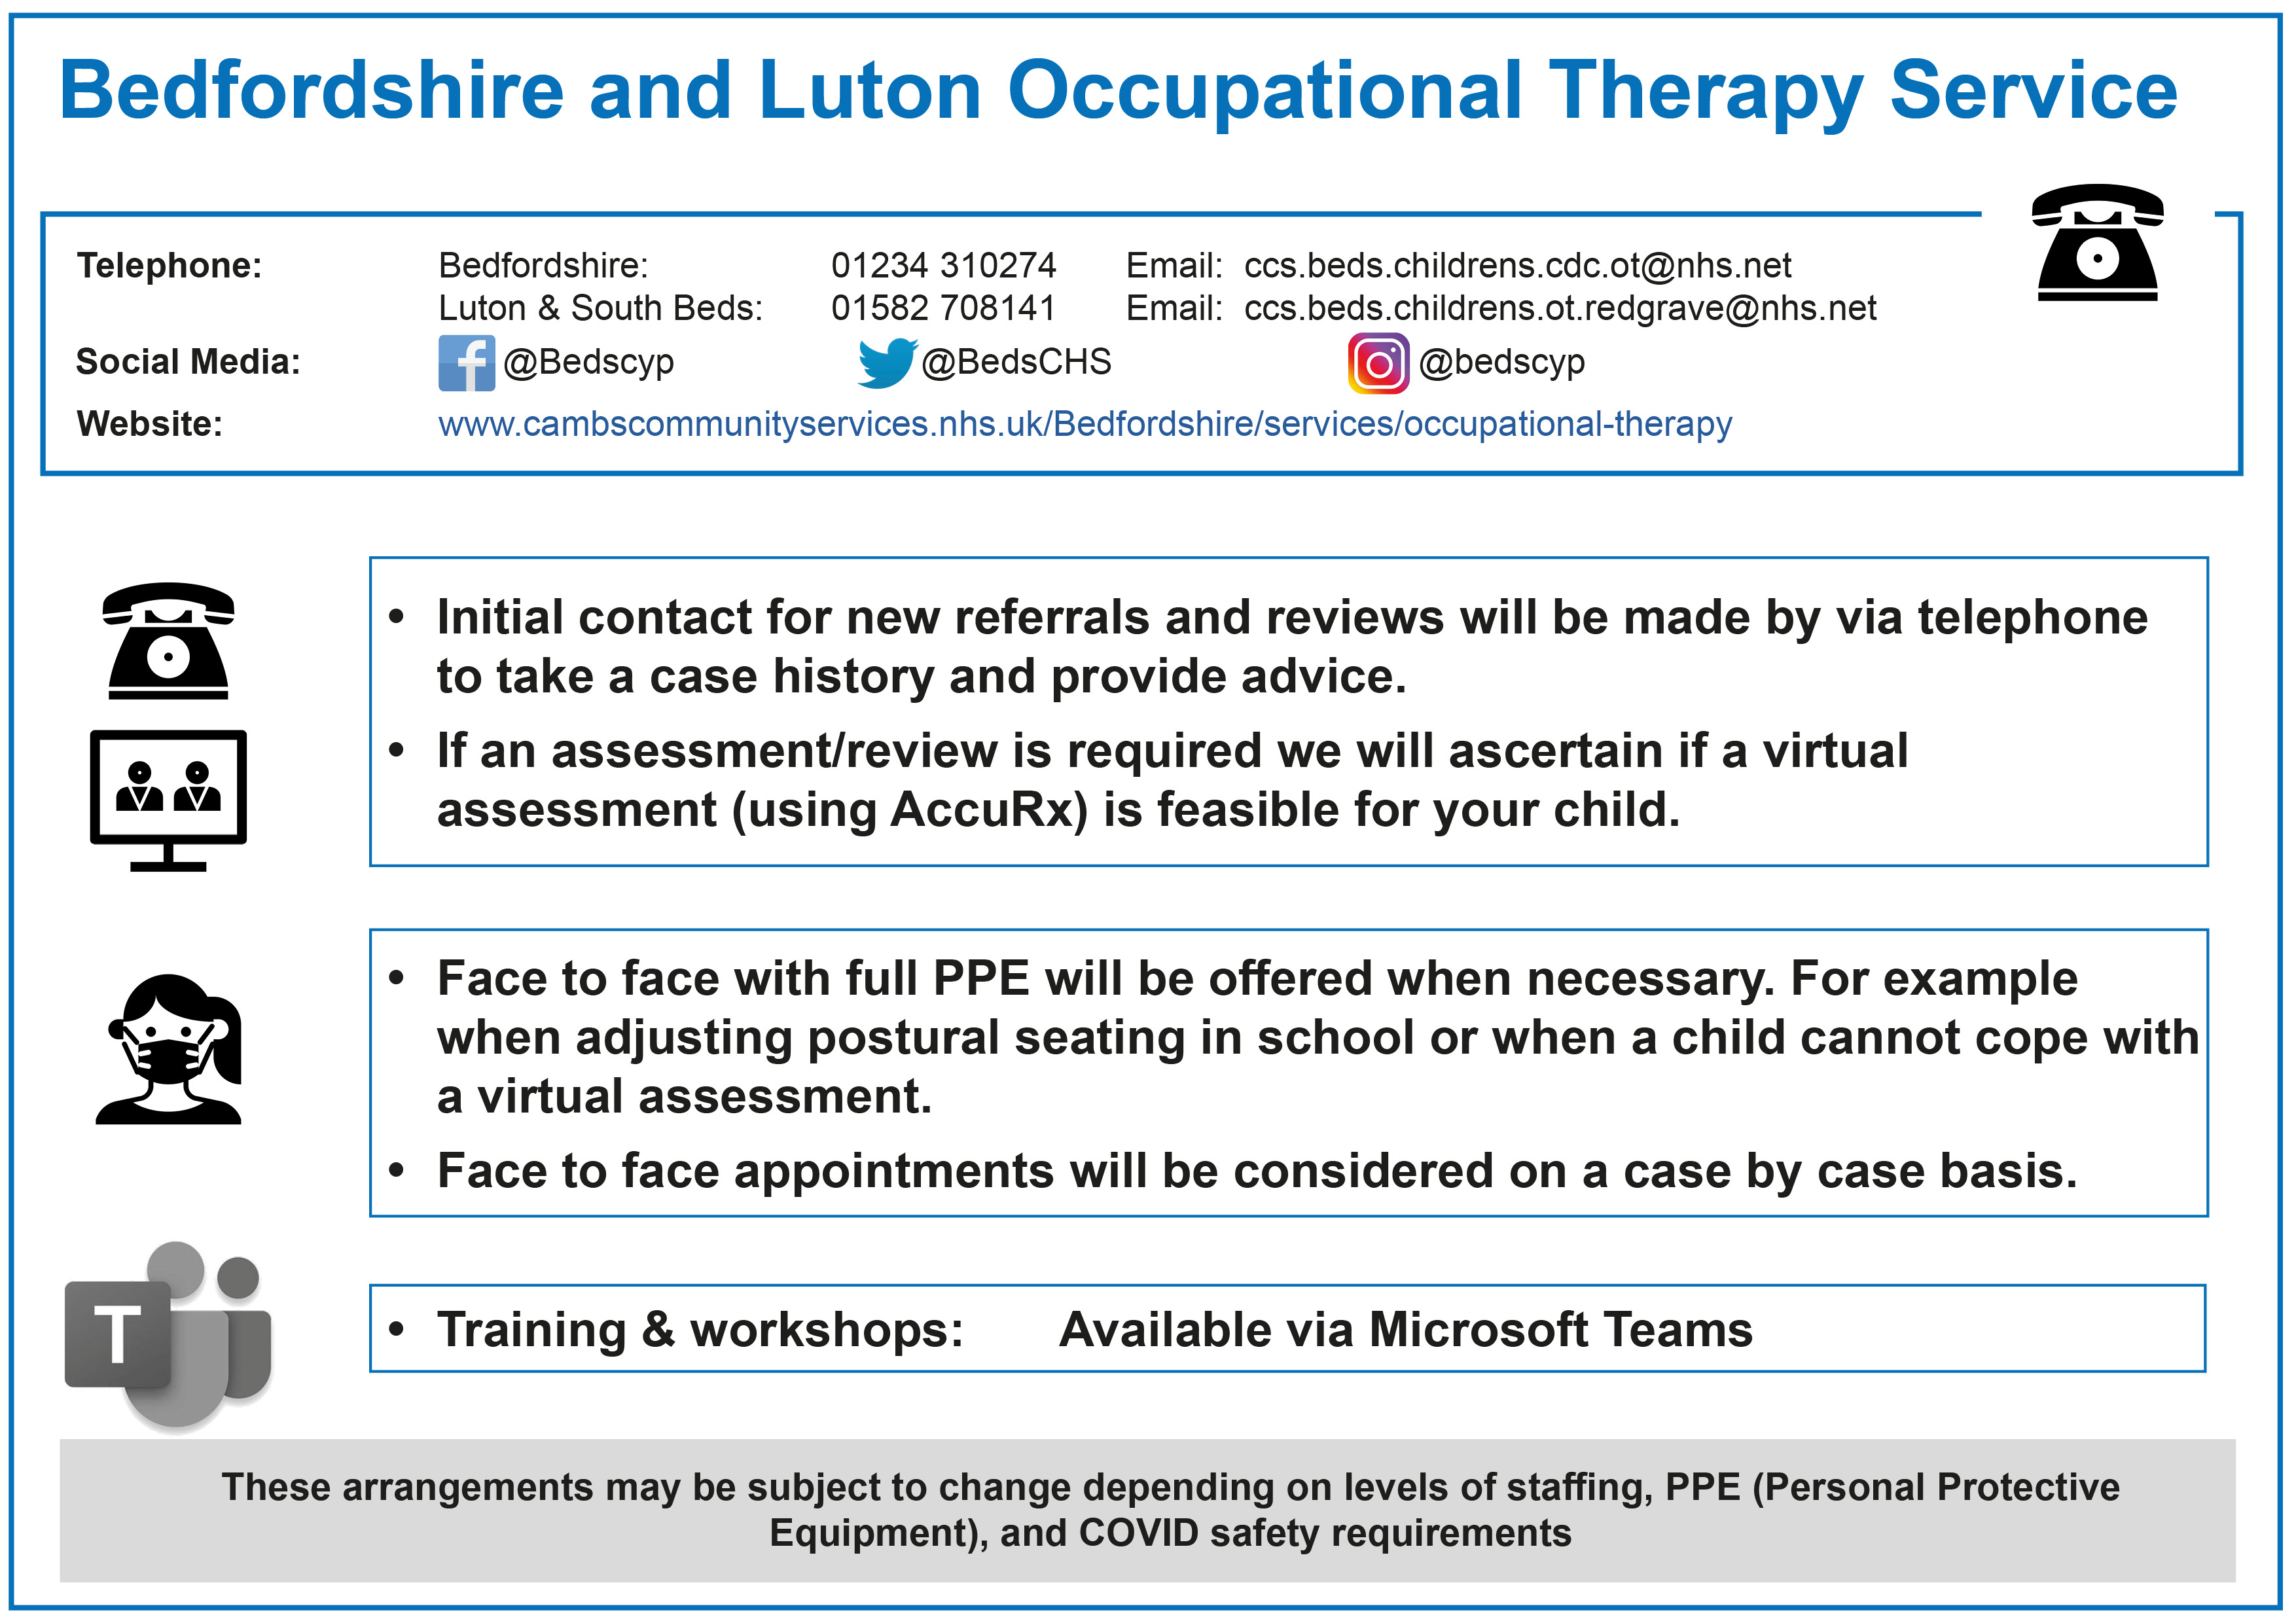 Beds and Luton OT Service.indd v3